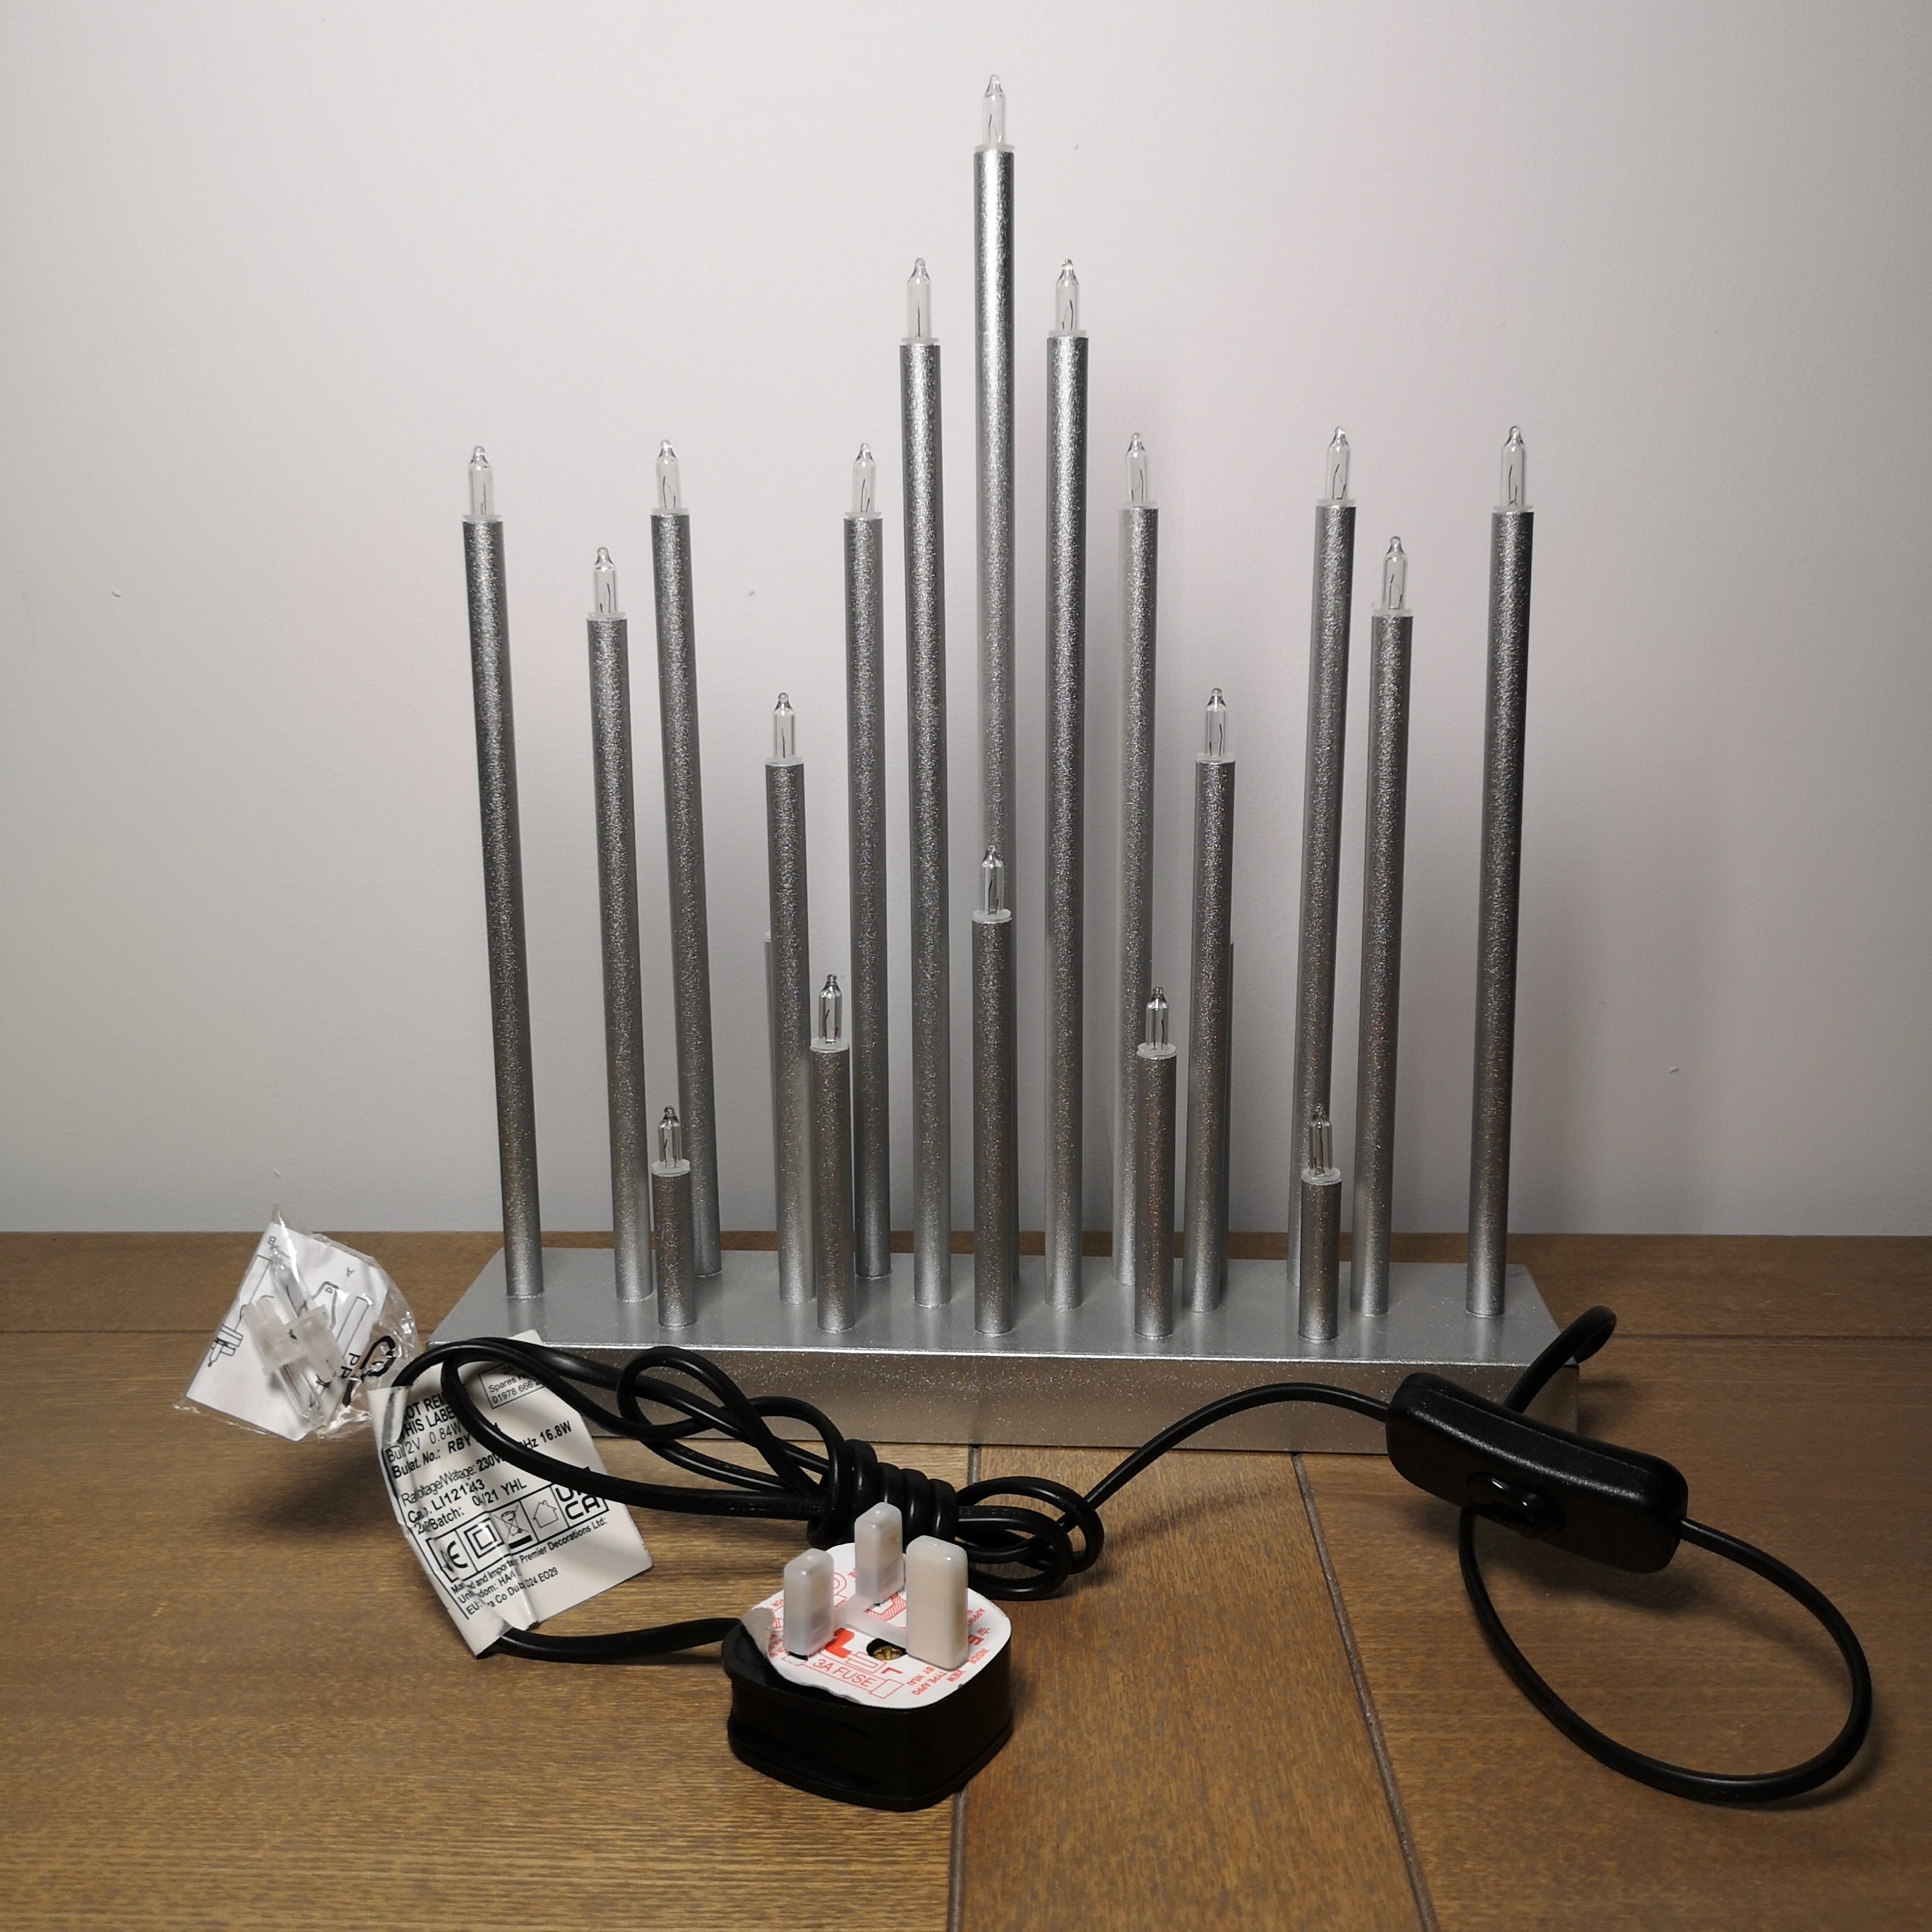 33cm Premier Christmas Candle Bridge Star Shaped with 20 LEDs In Silver Mains Power